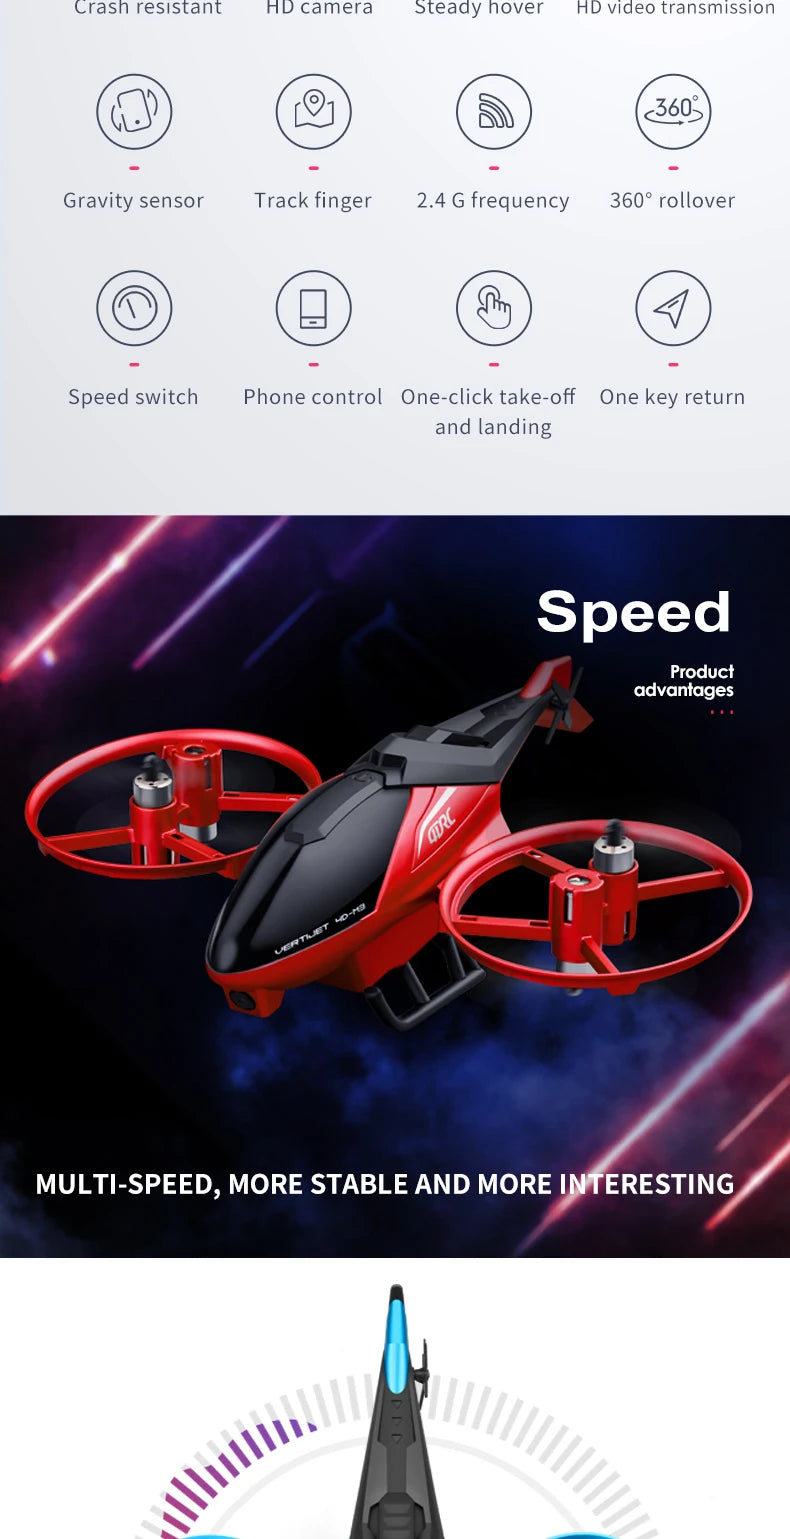 4DRC M3 RC Helicopter, Crash resistant HD camera Steady hover HD video transmission 3605 Gravity sensor Track